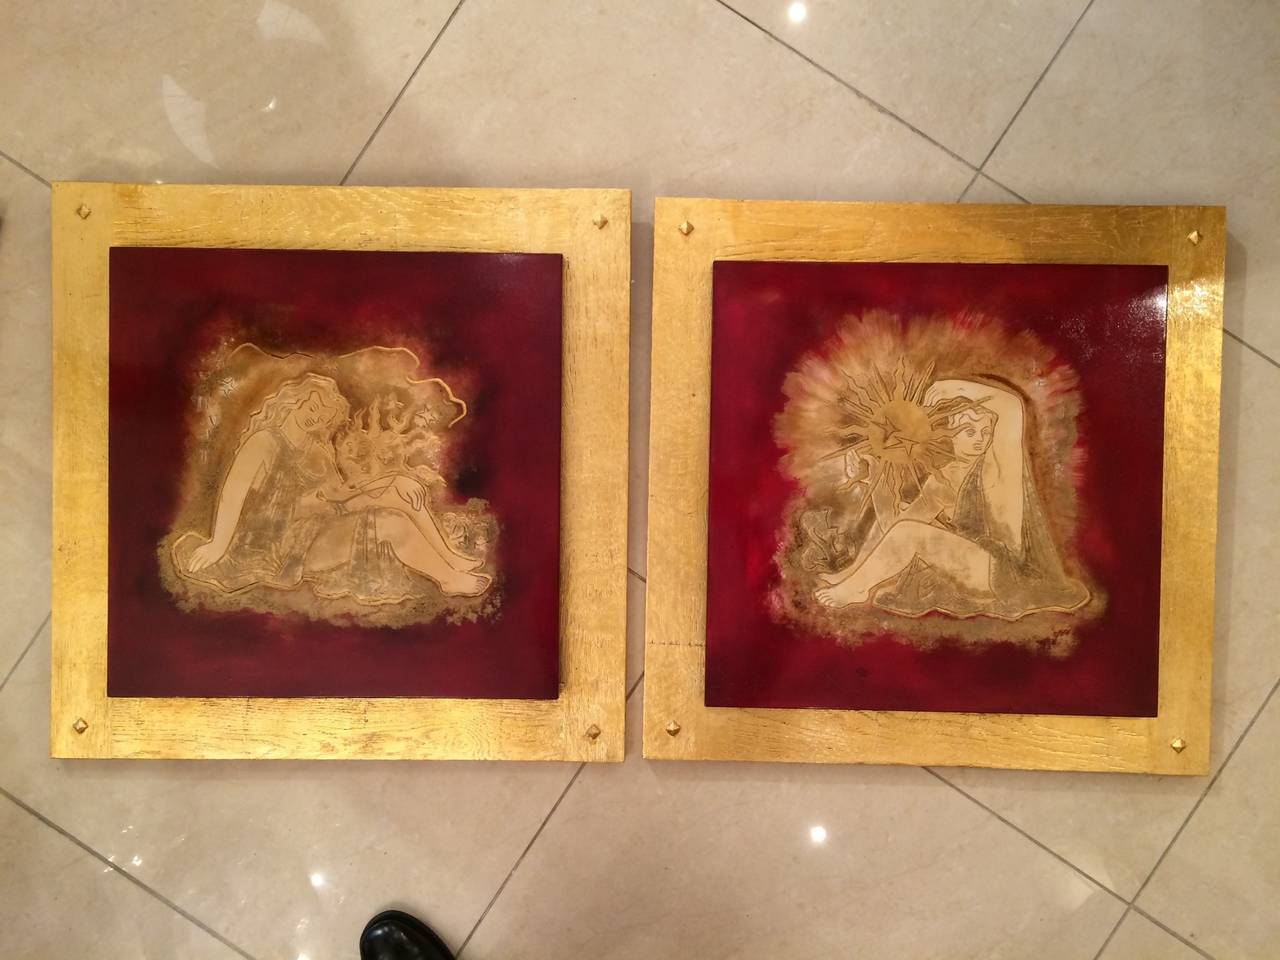 Pair of red ,ivoiry and gold laquered pannels on wood
French art deco period
Named The Night and the Day
The night : a women holding the heart of the night
The day : a men holding the sun
Signed Robert Mignot